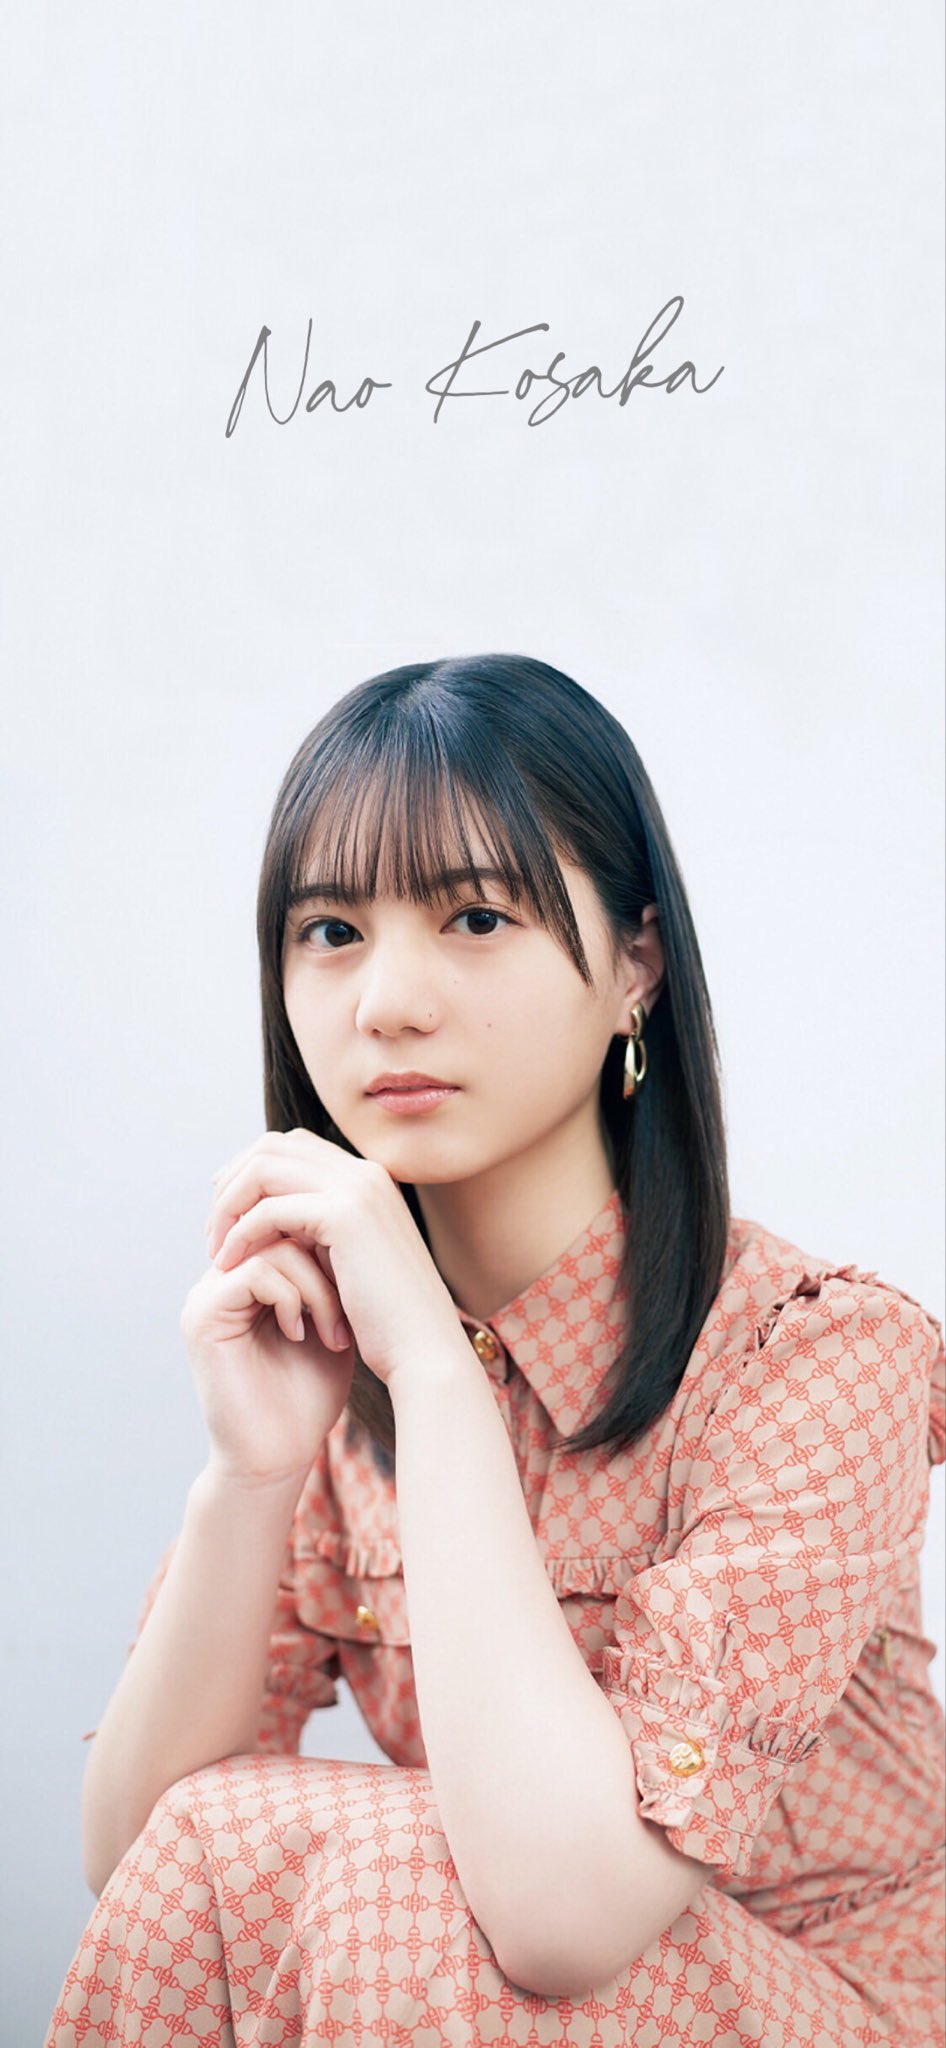 Ryota 小坂菜緒 壁紙 Part1 保存の際は フォロー Amp Rtお願いします 日向坂46 小坂菜緒 T Co Bxicngf3hn Twitter